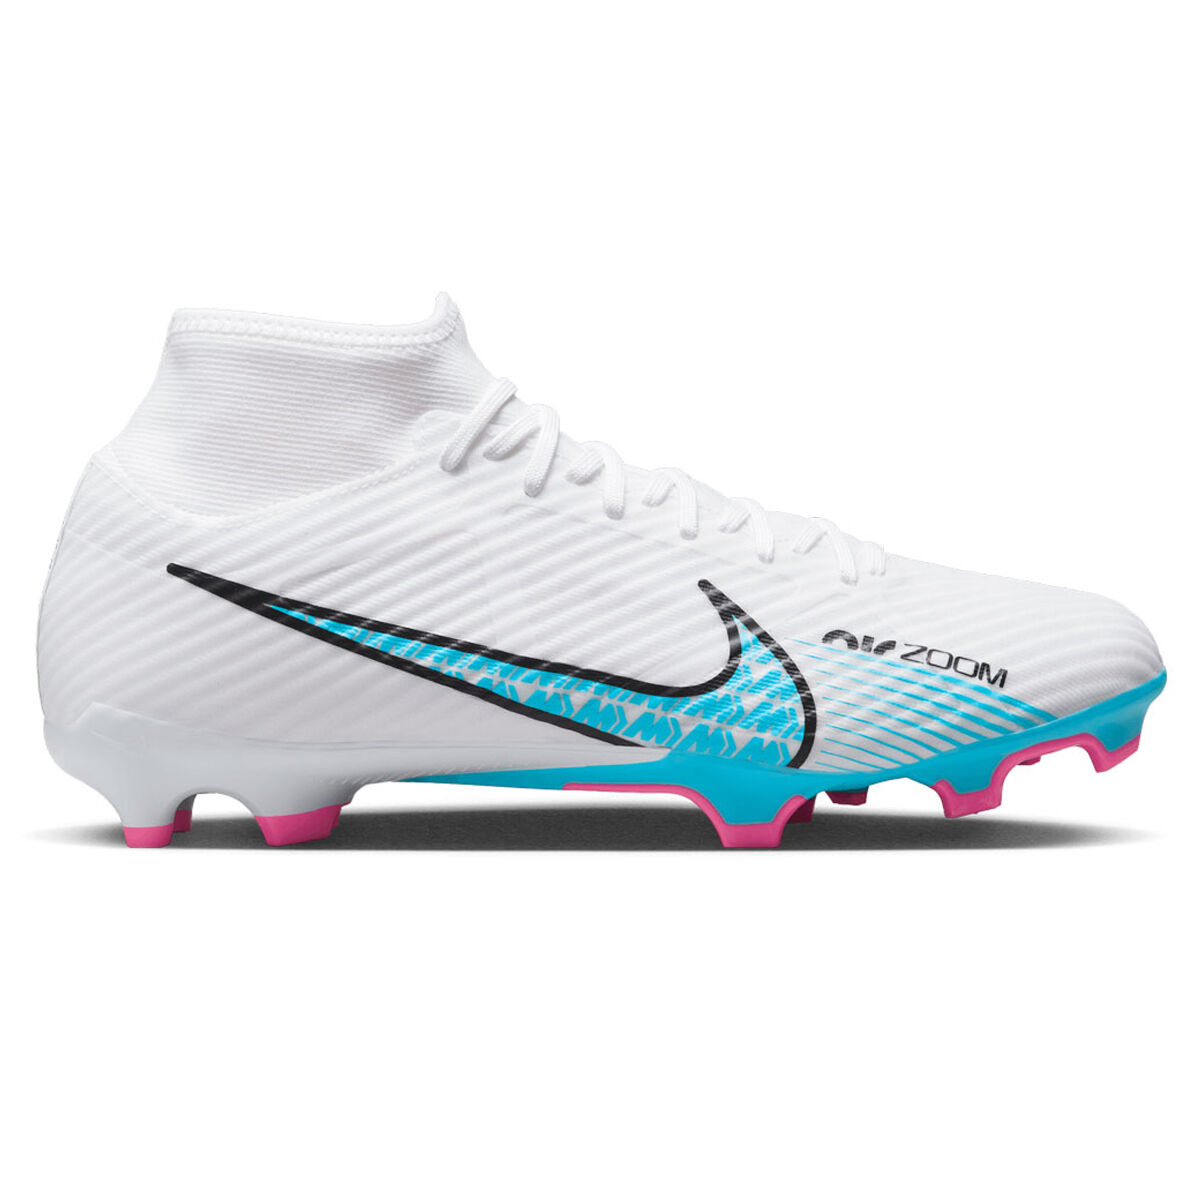 nike official football shoes